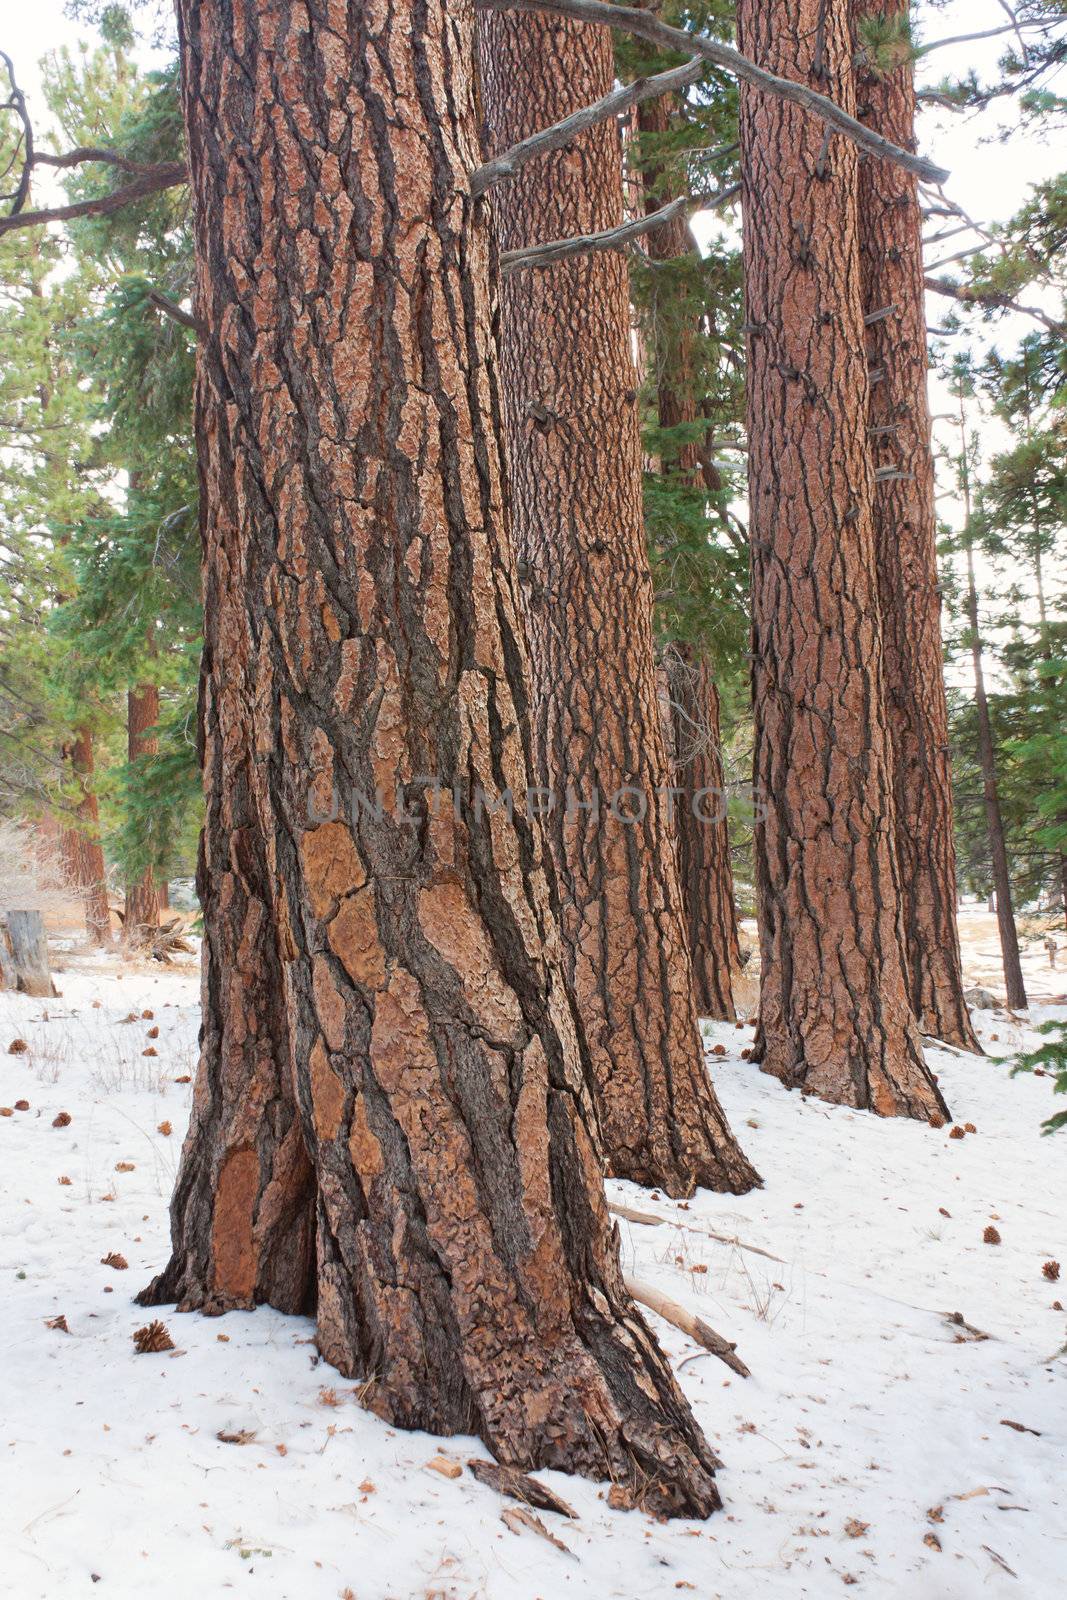 A stand of mature Coulter Pine in Mount San Jacinto State Park.